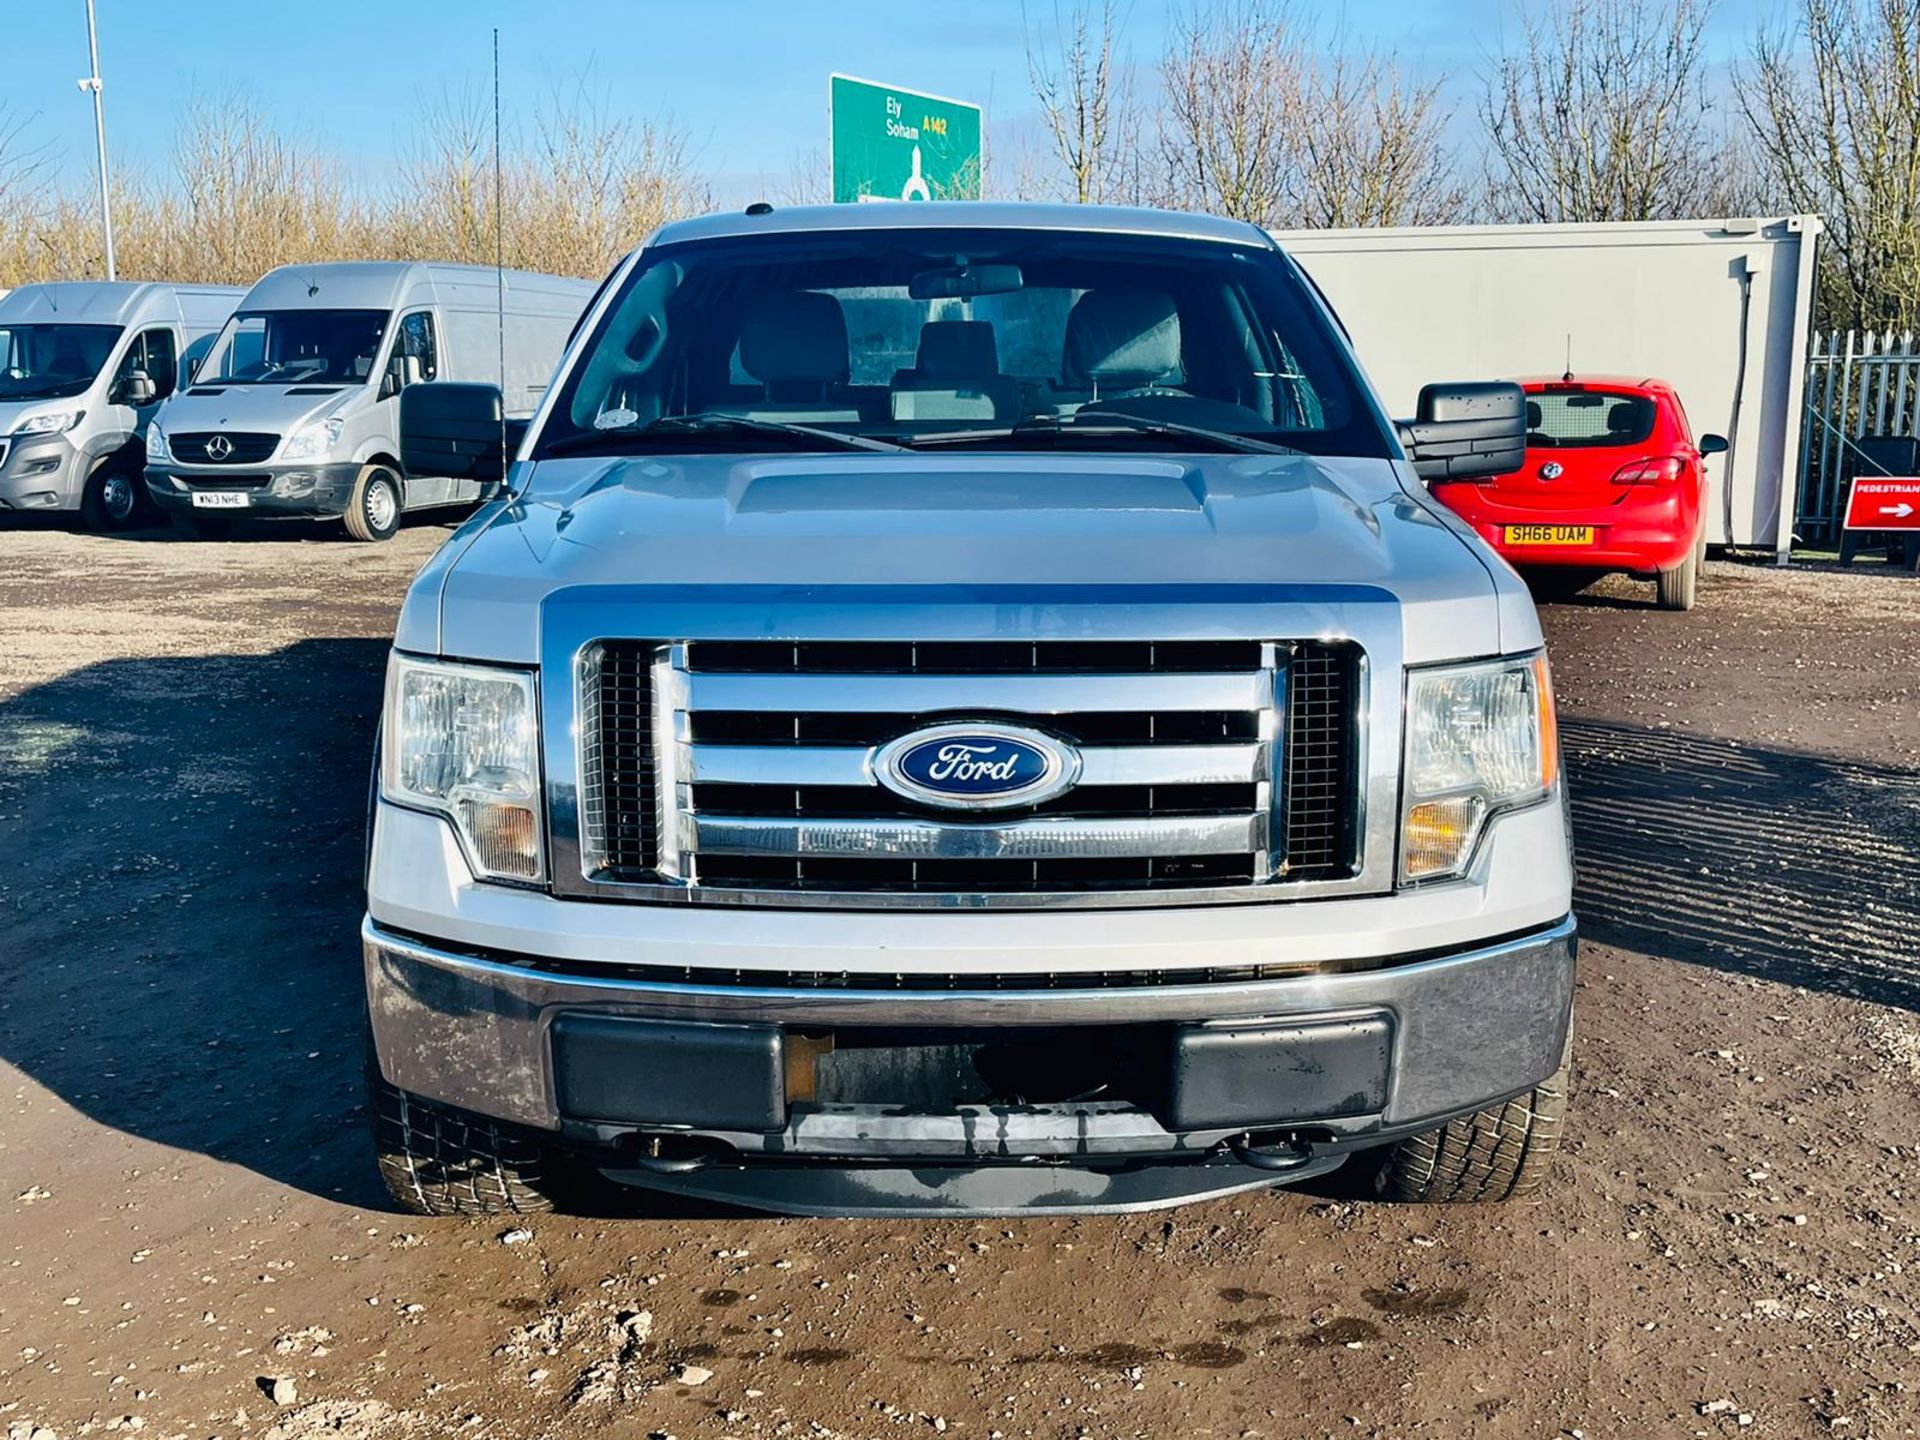 ** ON SALE ** Ford F-150 5.0L V8 XLT Edition 4WD Super-Crew '2011 Year' A/C - Cruise Control - ULEZ - Image 4 of 29